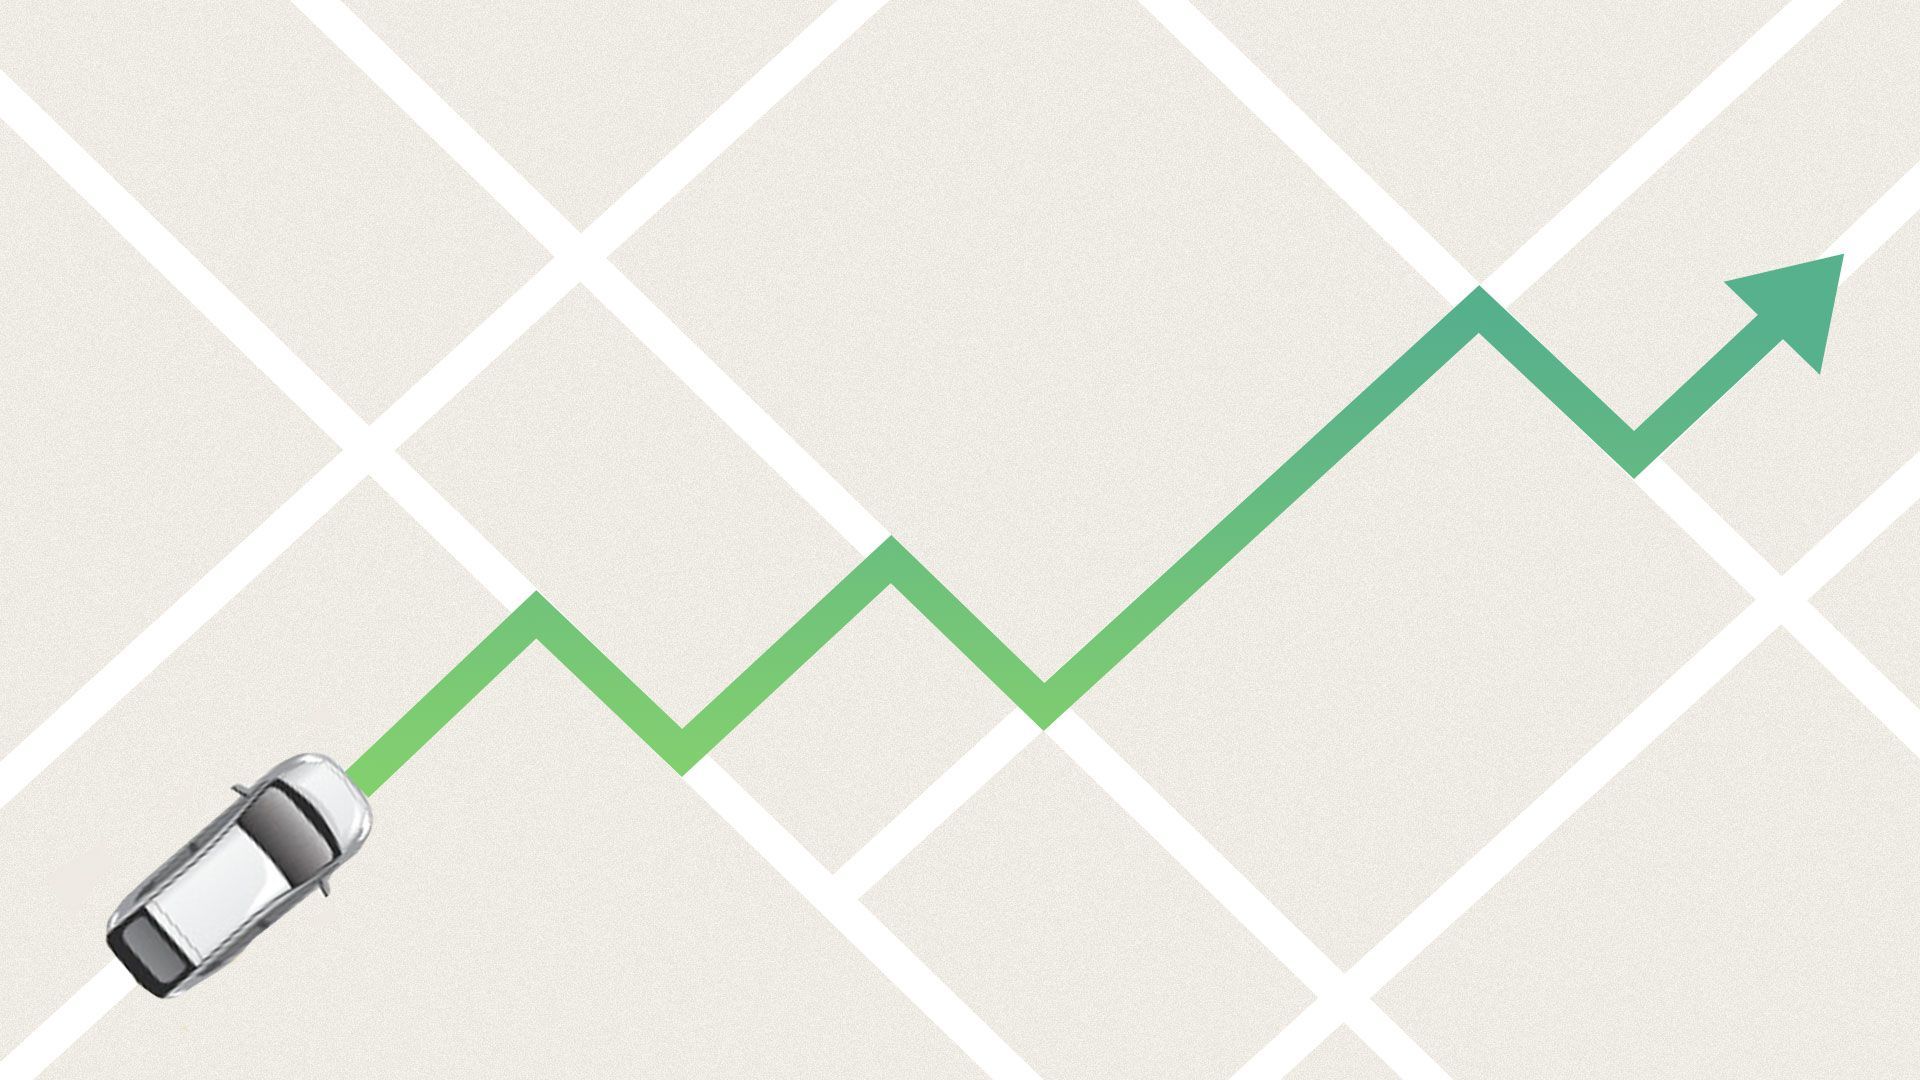 Illustration of an Uber route in the shape of an upward market trend line